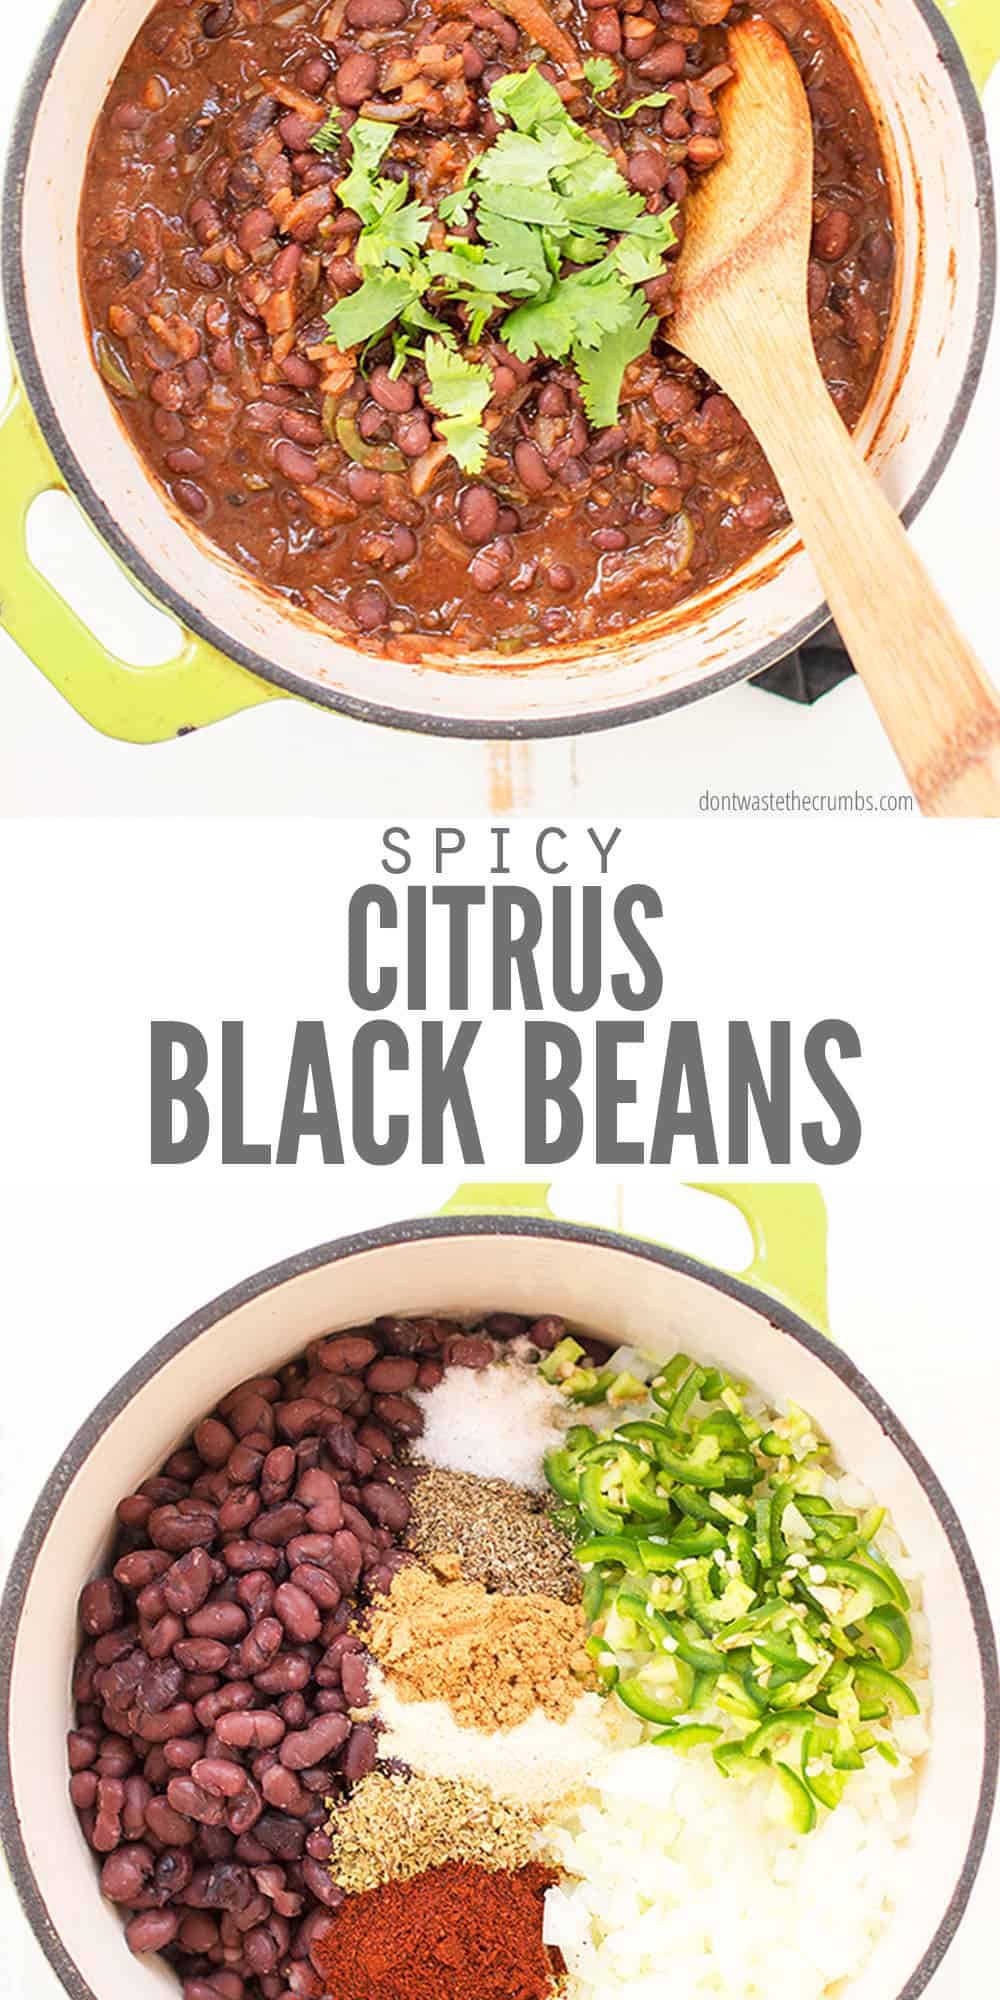 Our Favorite Black Beans Recipe - Don't Waste the Crumbs